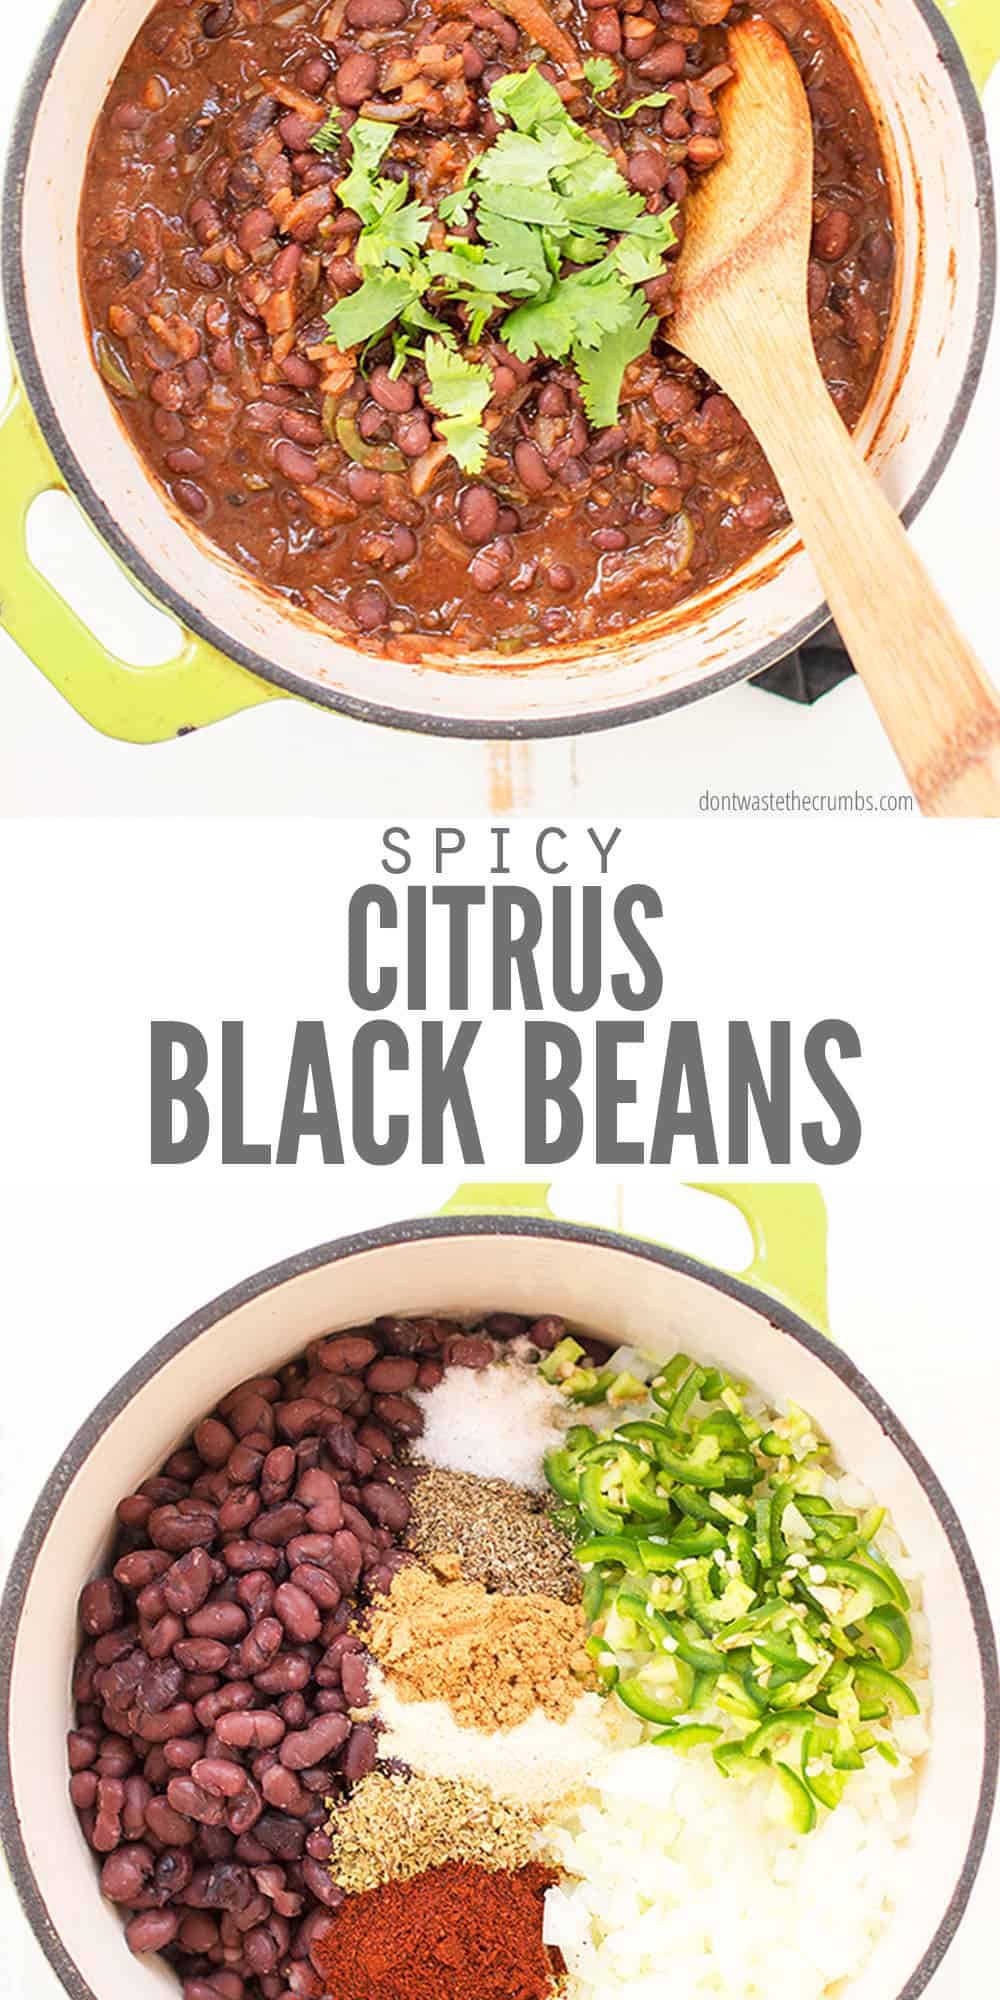 Our Favorite Black Beans Recipe - Don't Waste the Crumbs